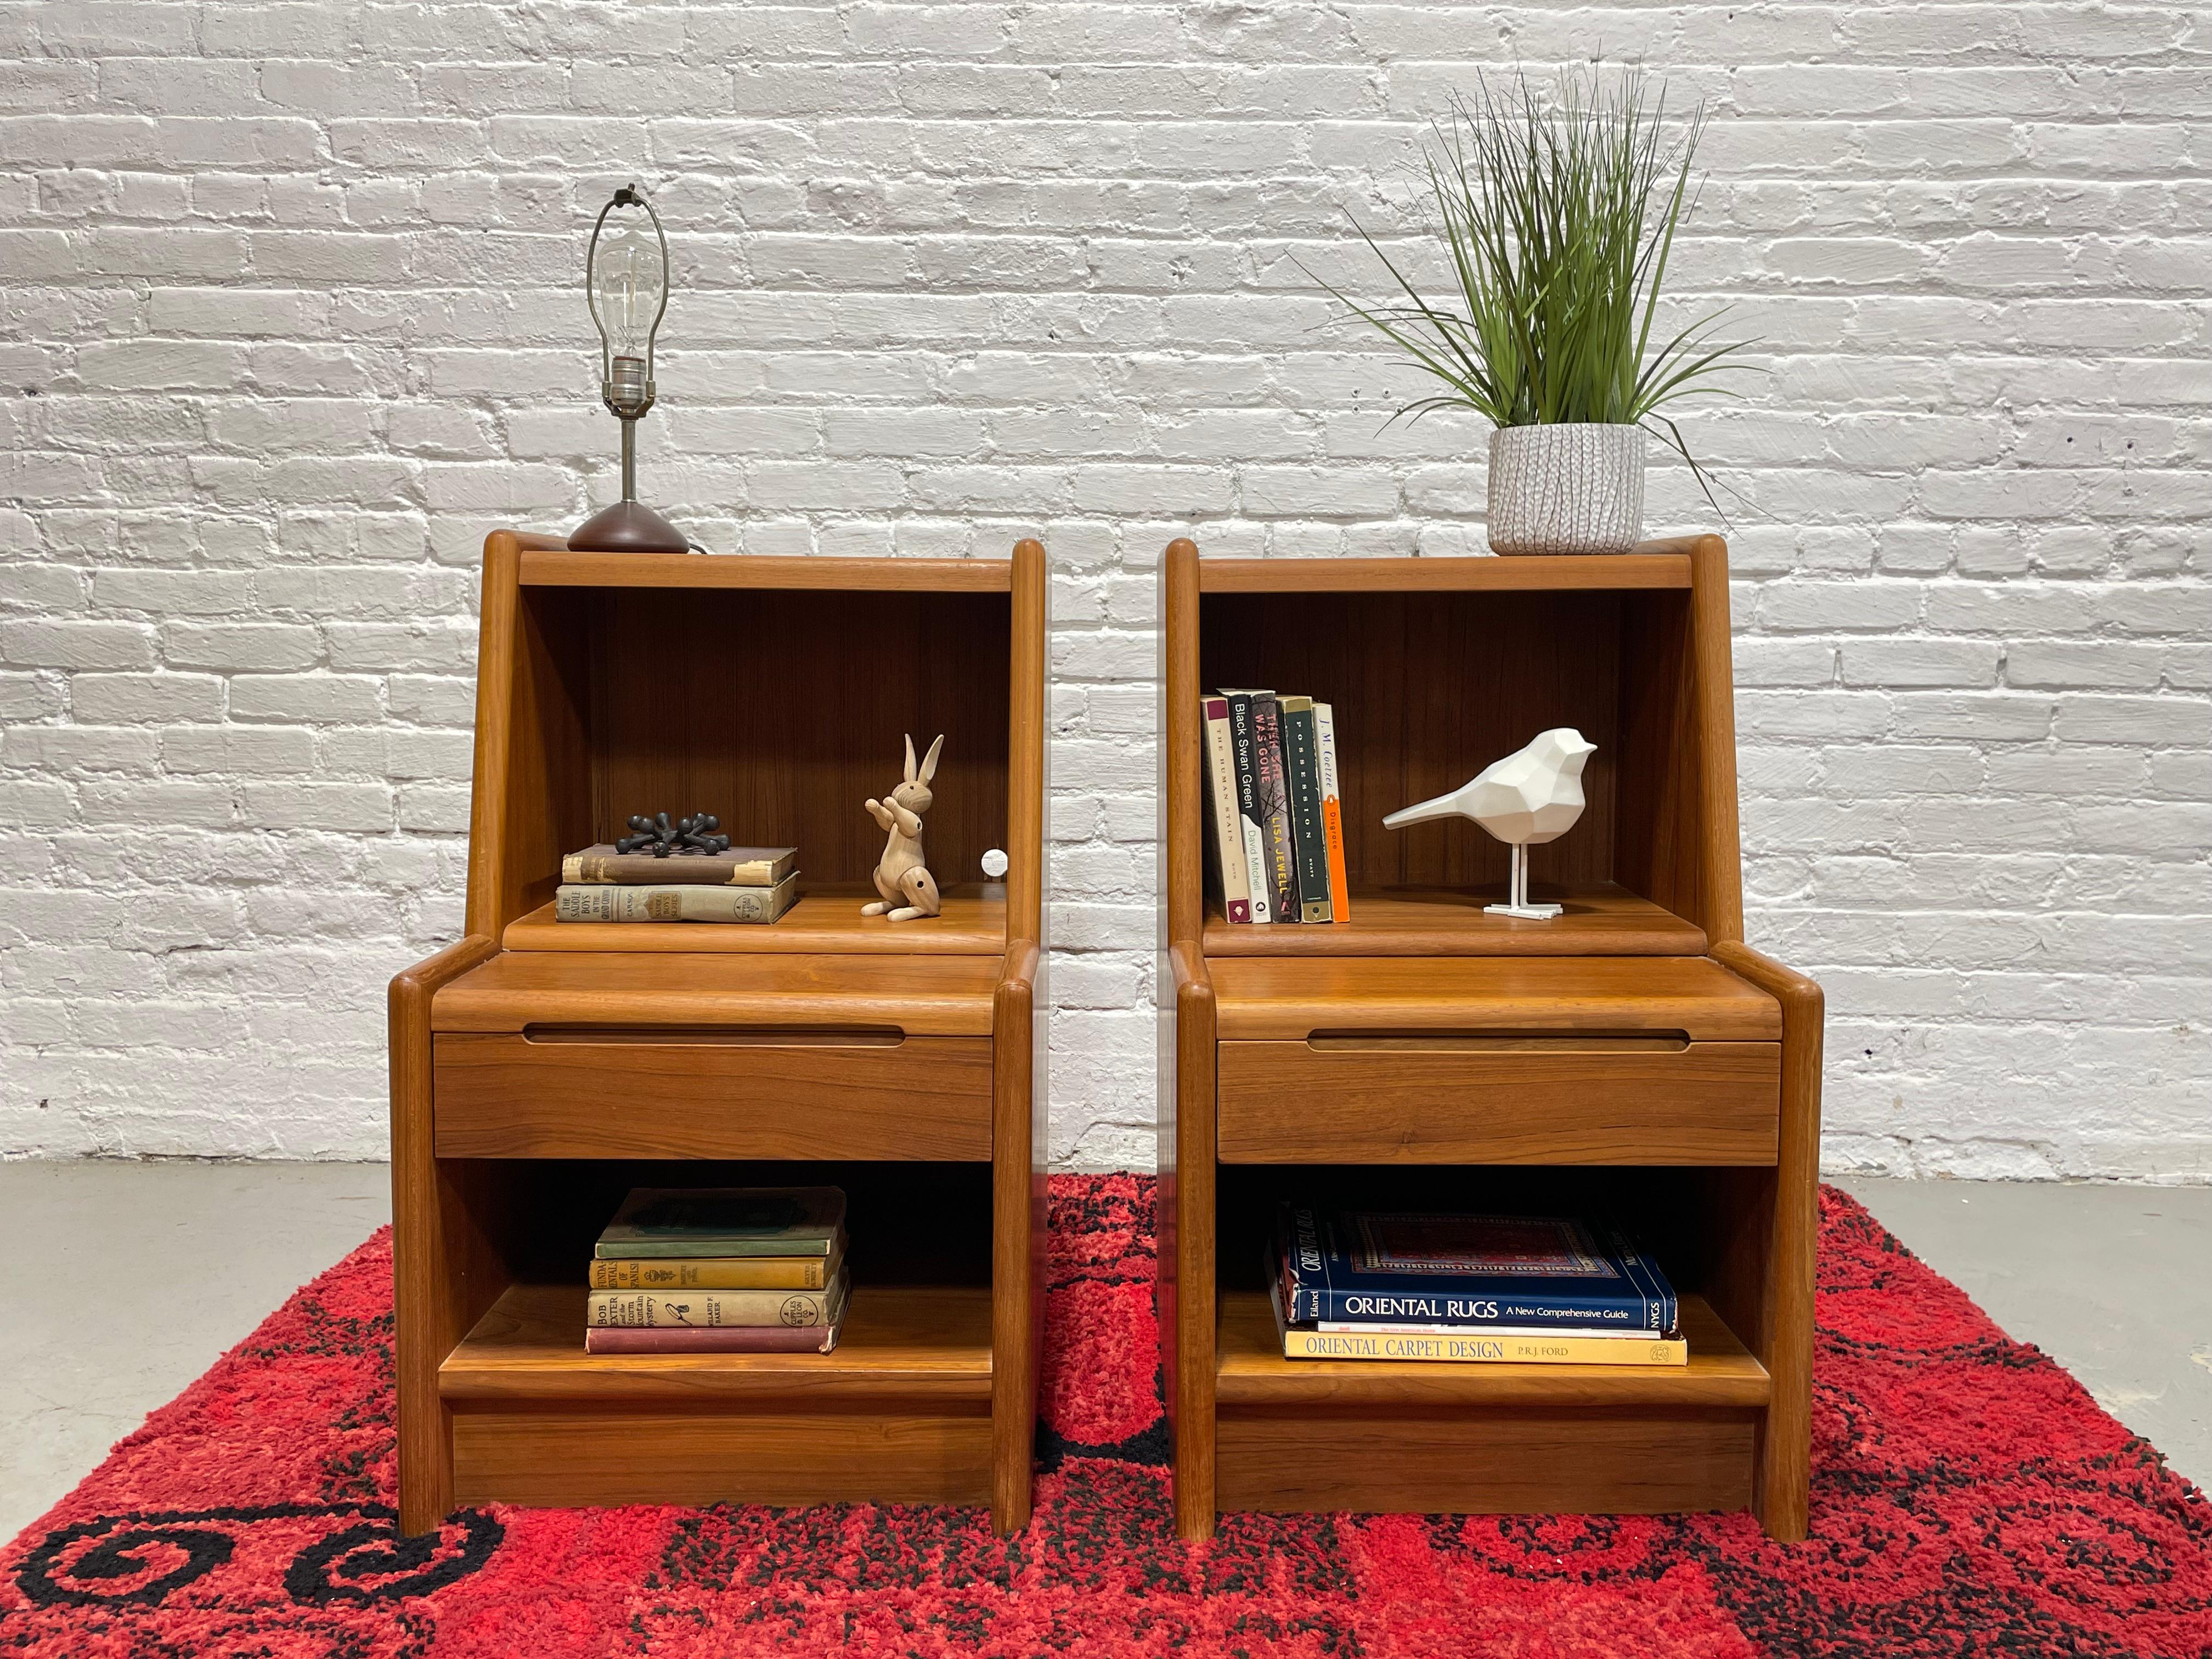 Mid Century Modern Teak Nightstands, Made in Denmark, c. 1960's.  This incredible pair offer loads of storage space - open cubby area above and below, a unique built-in drawer, perfect for storing private items and a hidden tabletop area that pulls